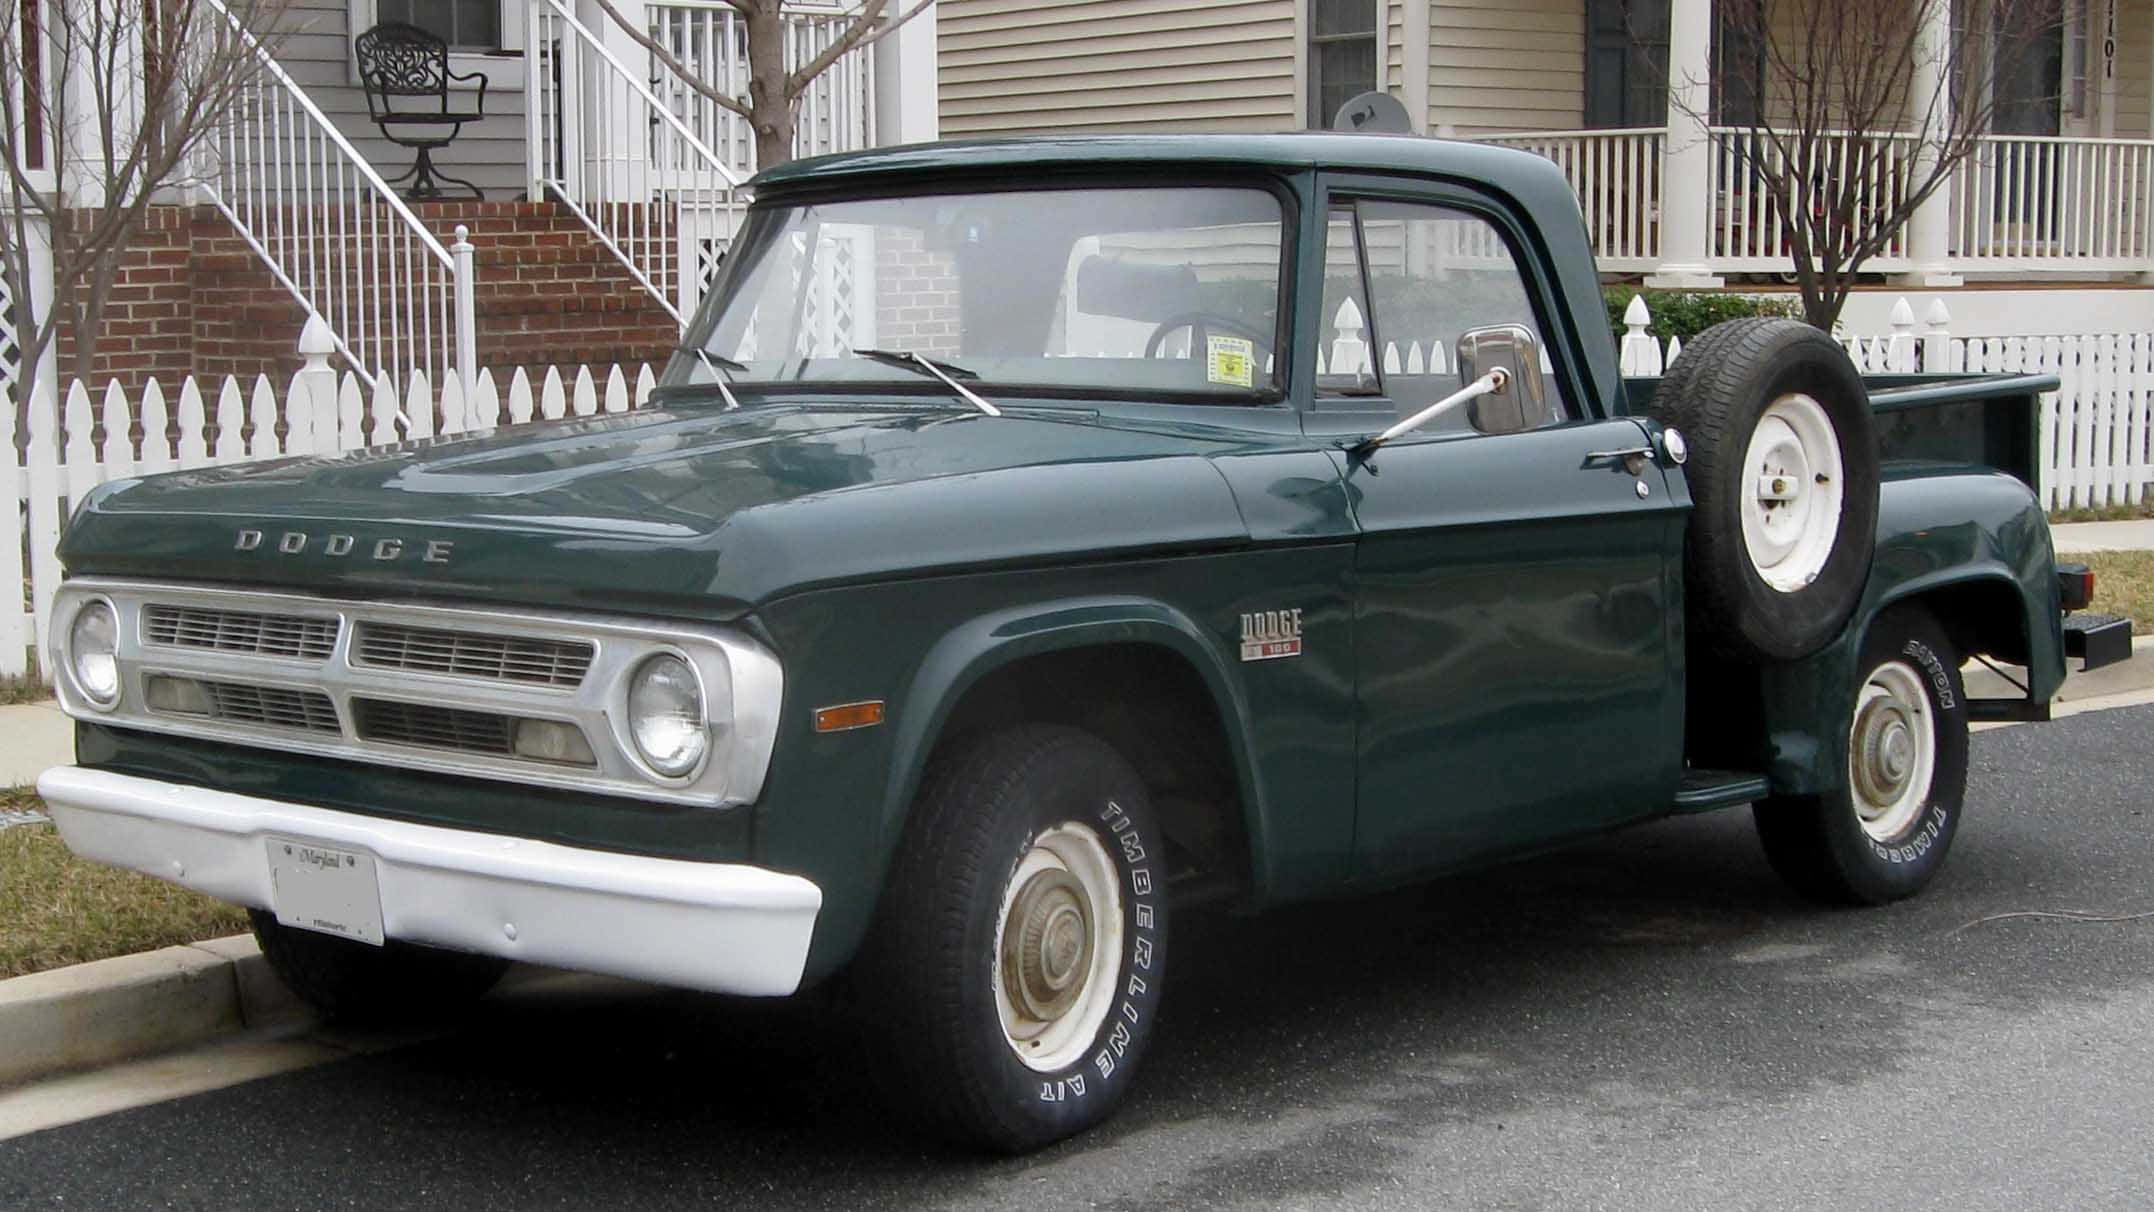 A Green Pickup Truck Parked On The Side Of The Street